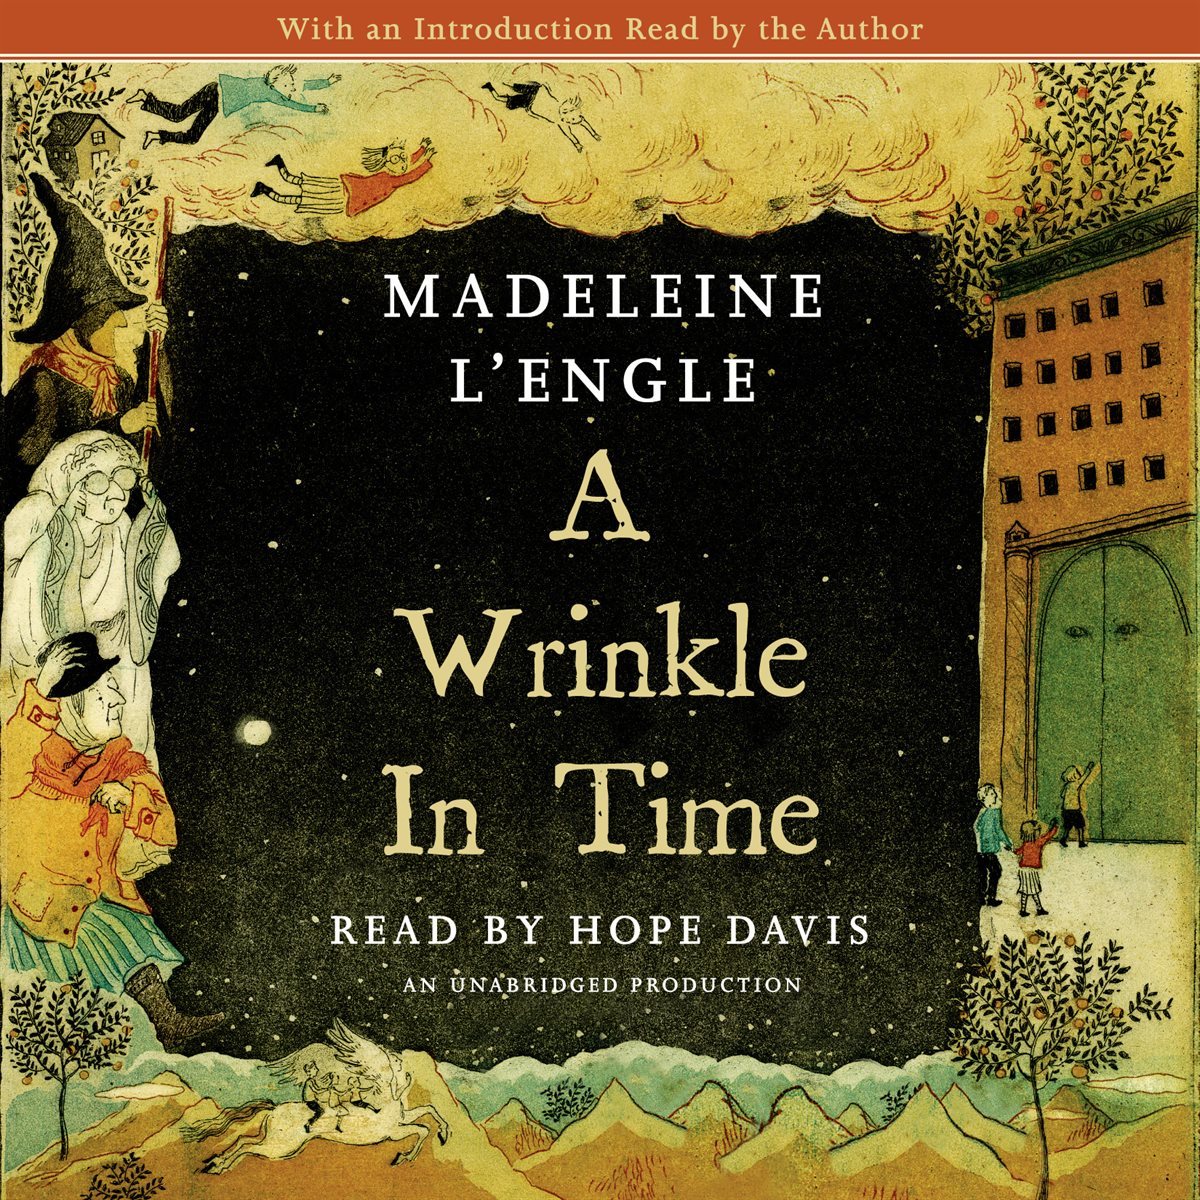 A Wrinkle in Time (시간의 주름 : 뉴베리 수상)